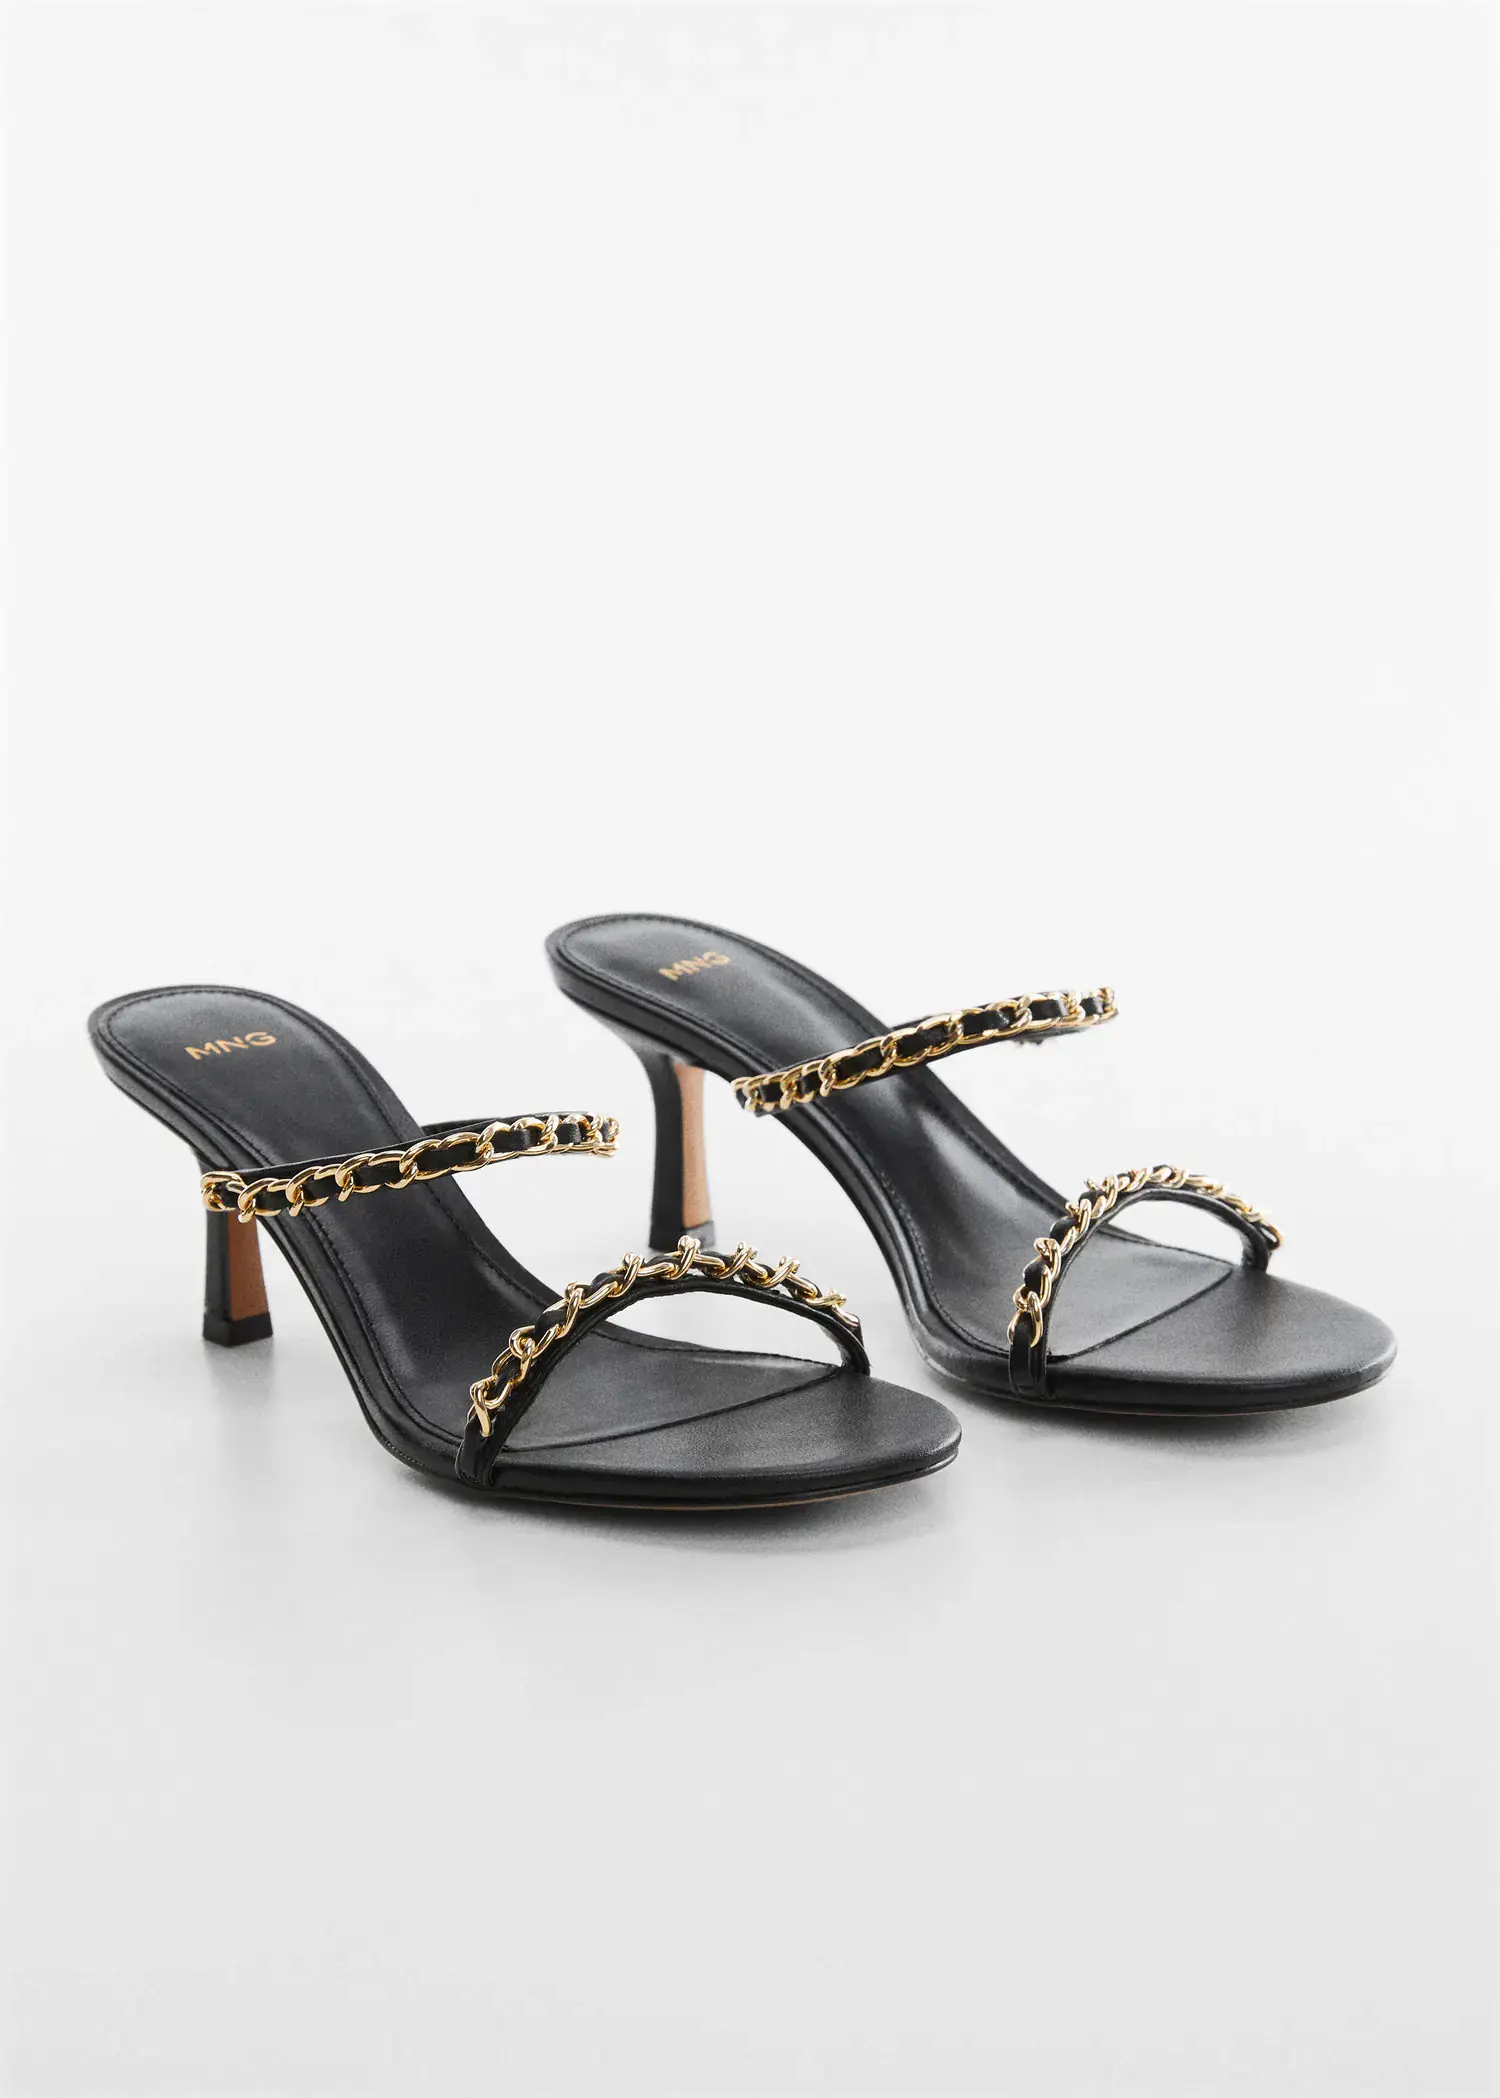 Mango High-heeled sandals with chain detail. a pair of black sandals with a leopard print strap. 